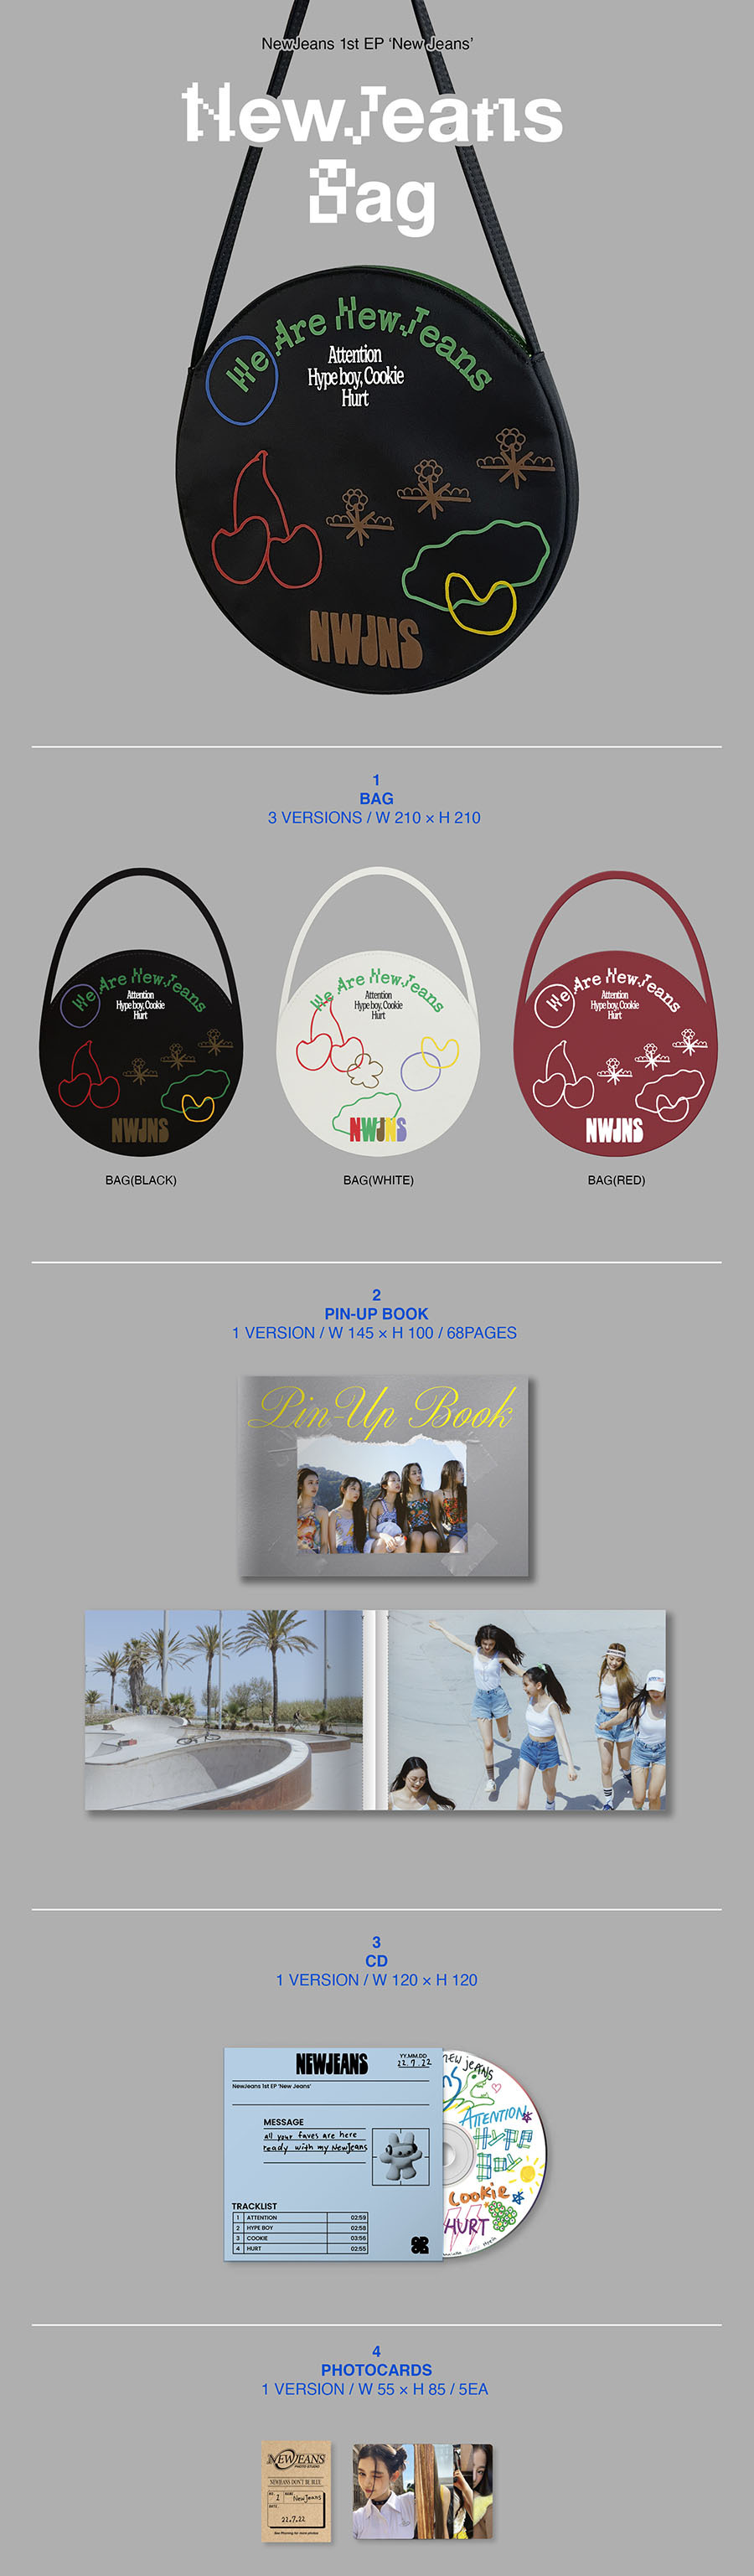 NewJeans - 1st EP [New Jeans] Bag(Red)ver. (Limited ver.) kpop kpopgirl NewJeans NewJeansalbum NewJeansbag NewJeansLimited